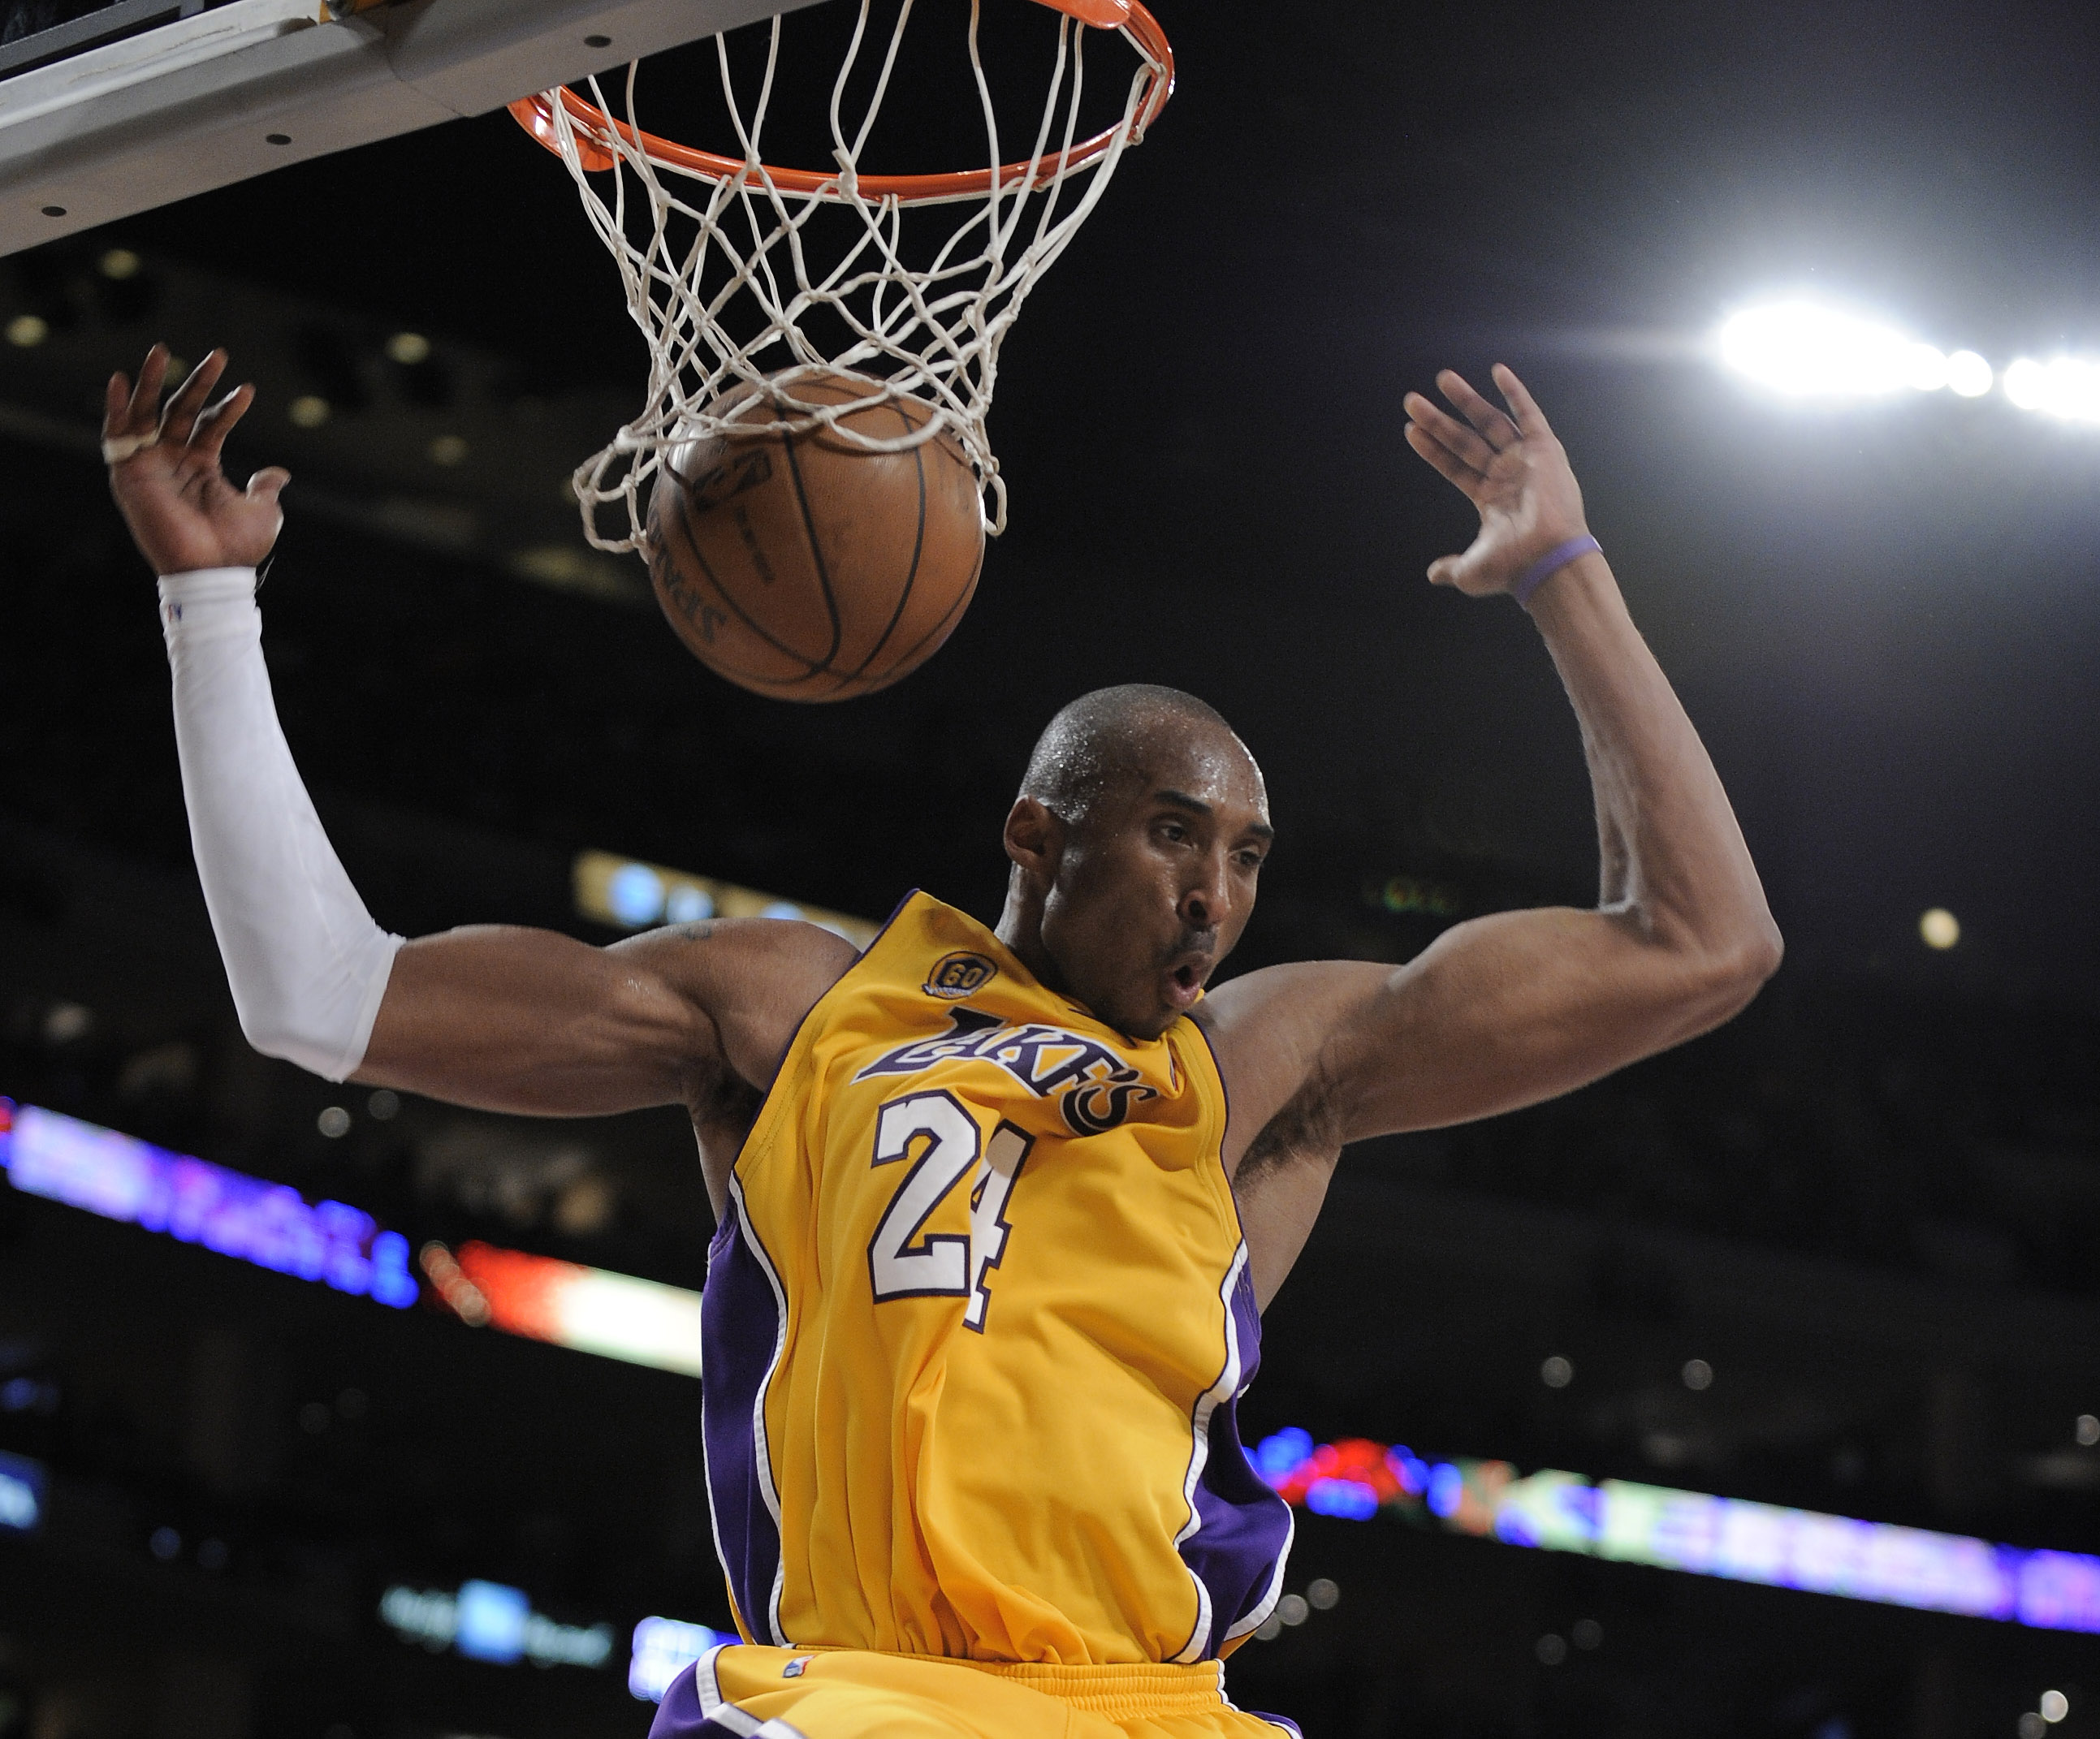 Los Angeles Lakers' Kobe Bryant says he will retire at end of season